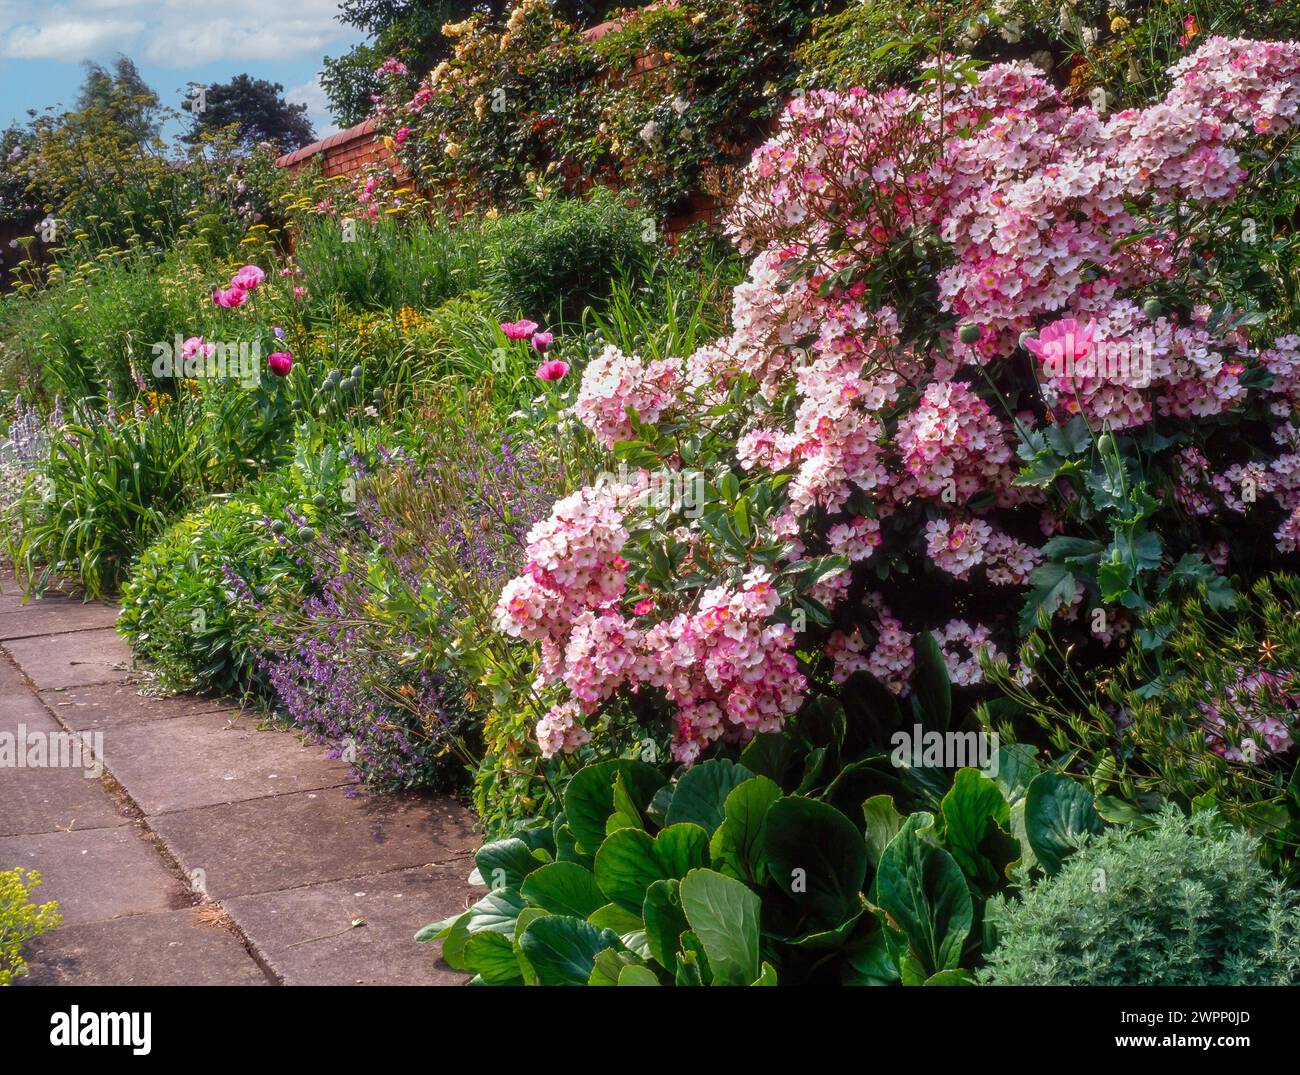 Deep herbaceous border with pink Rosa 'Ballerina' roses in bloom growing in old English walled garden with slabbed path, England, UK Stock Photo